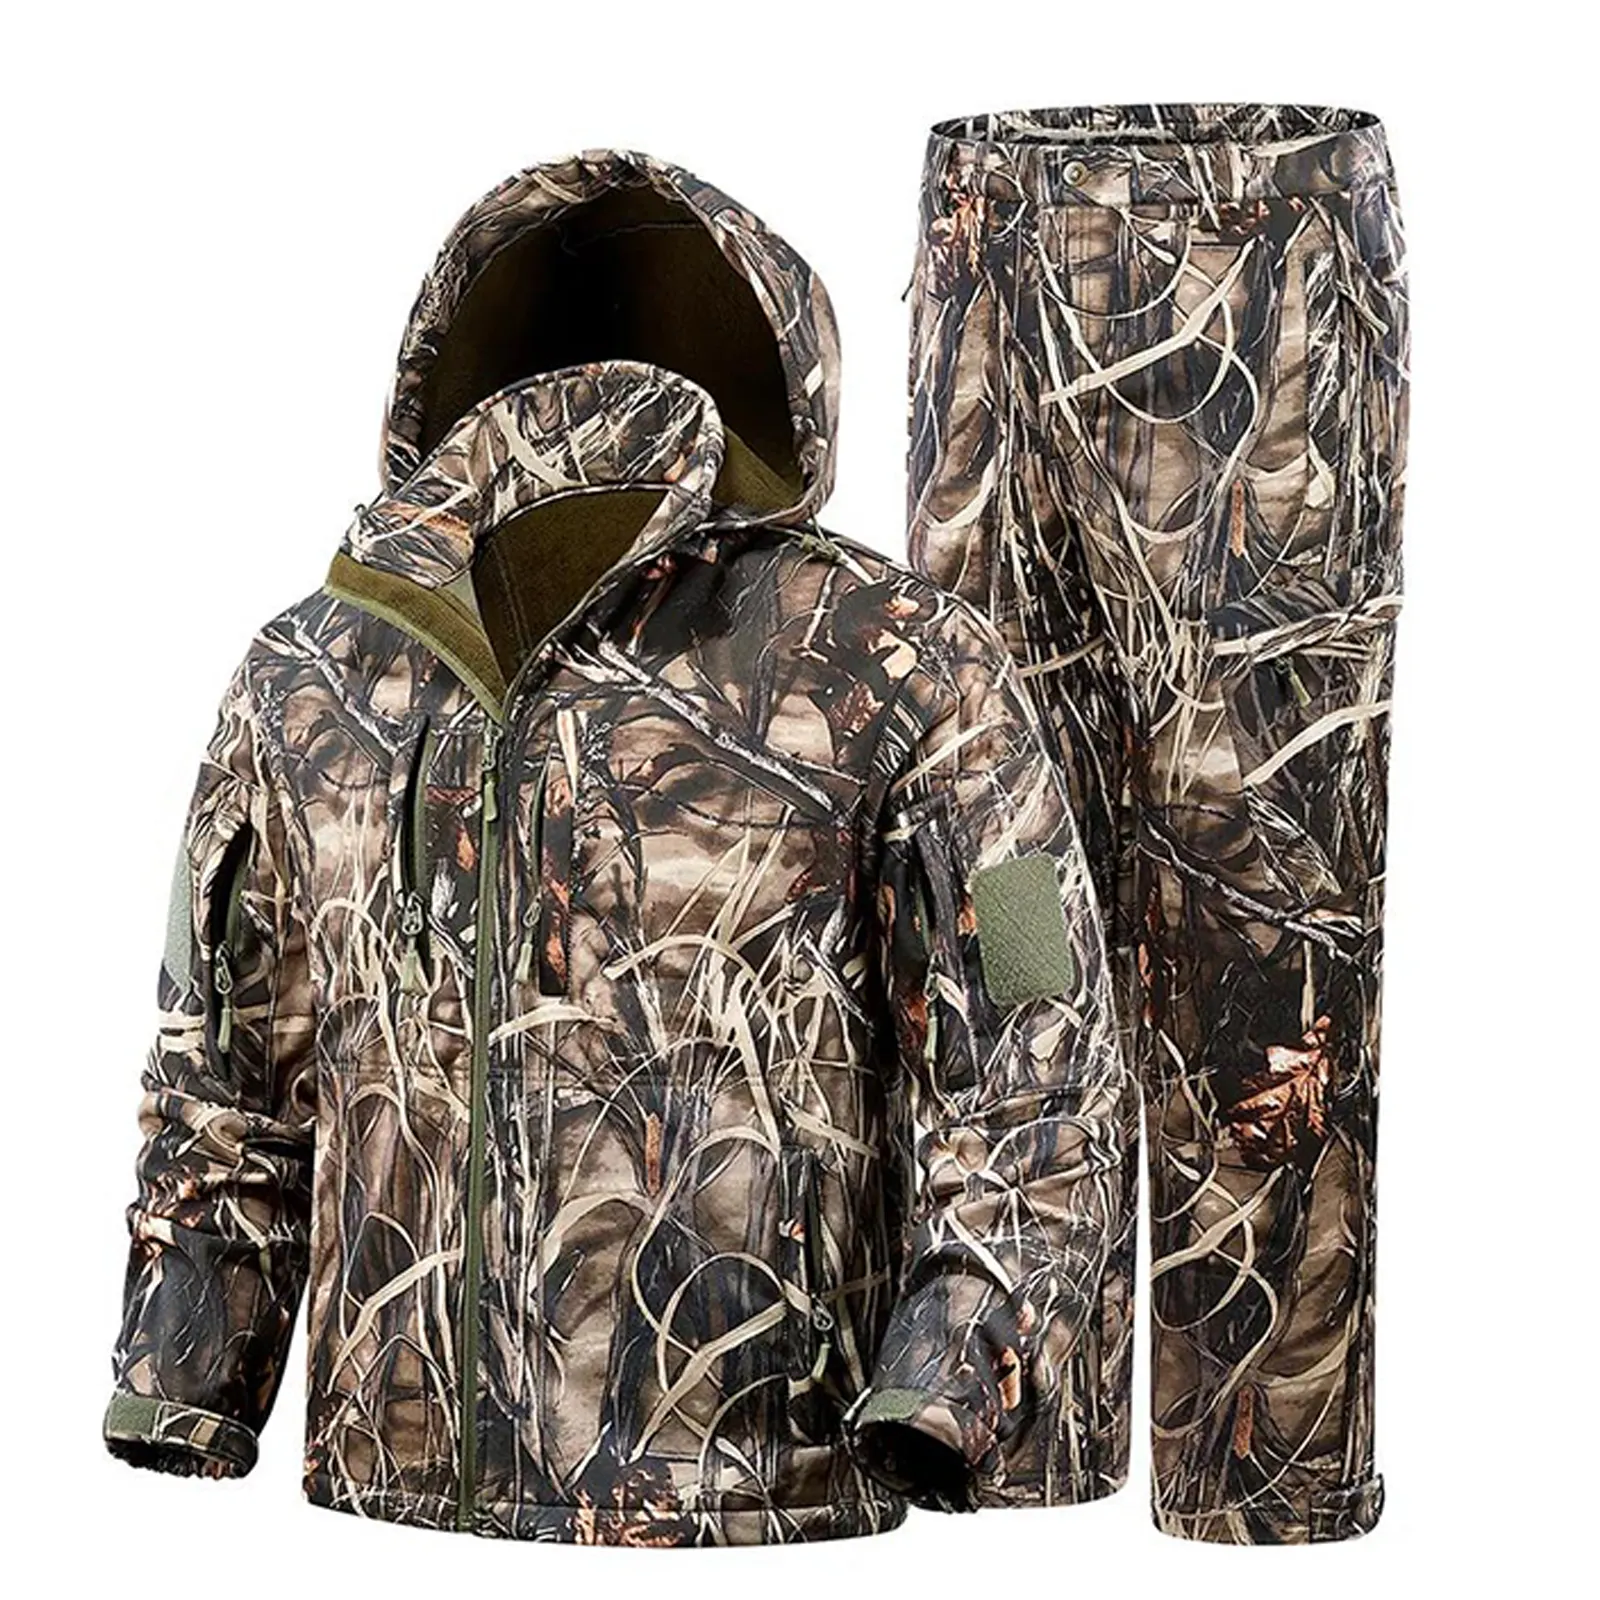 Hunting Clothes for Men Silent Water Resistant Hunting Duck Deer Hunting Jacket and Pants